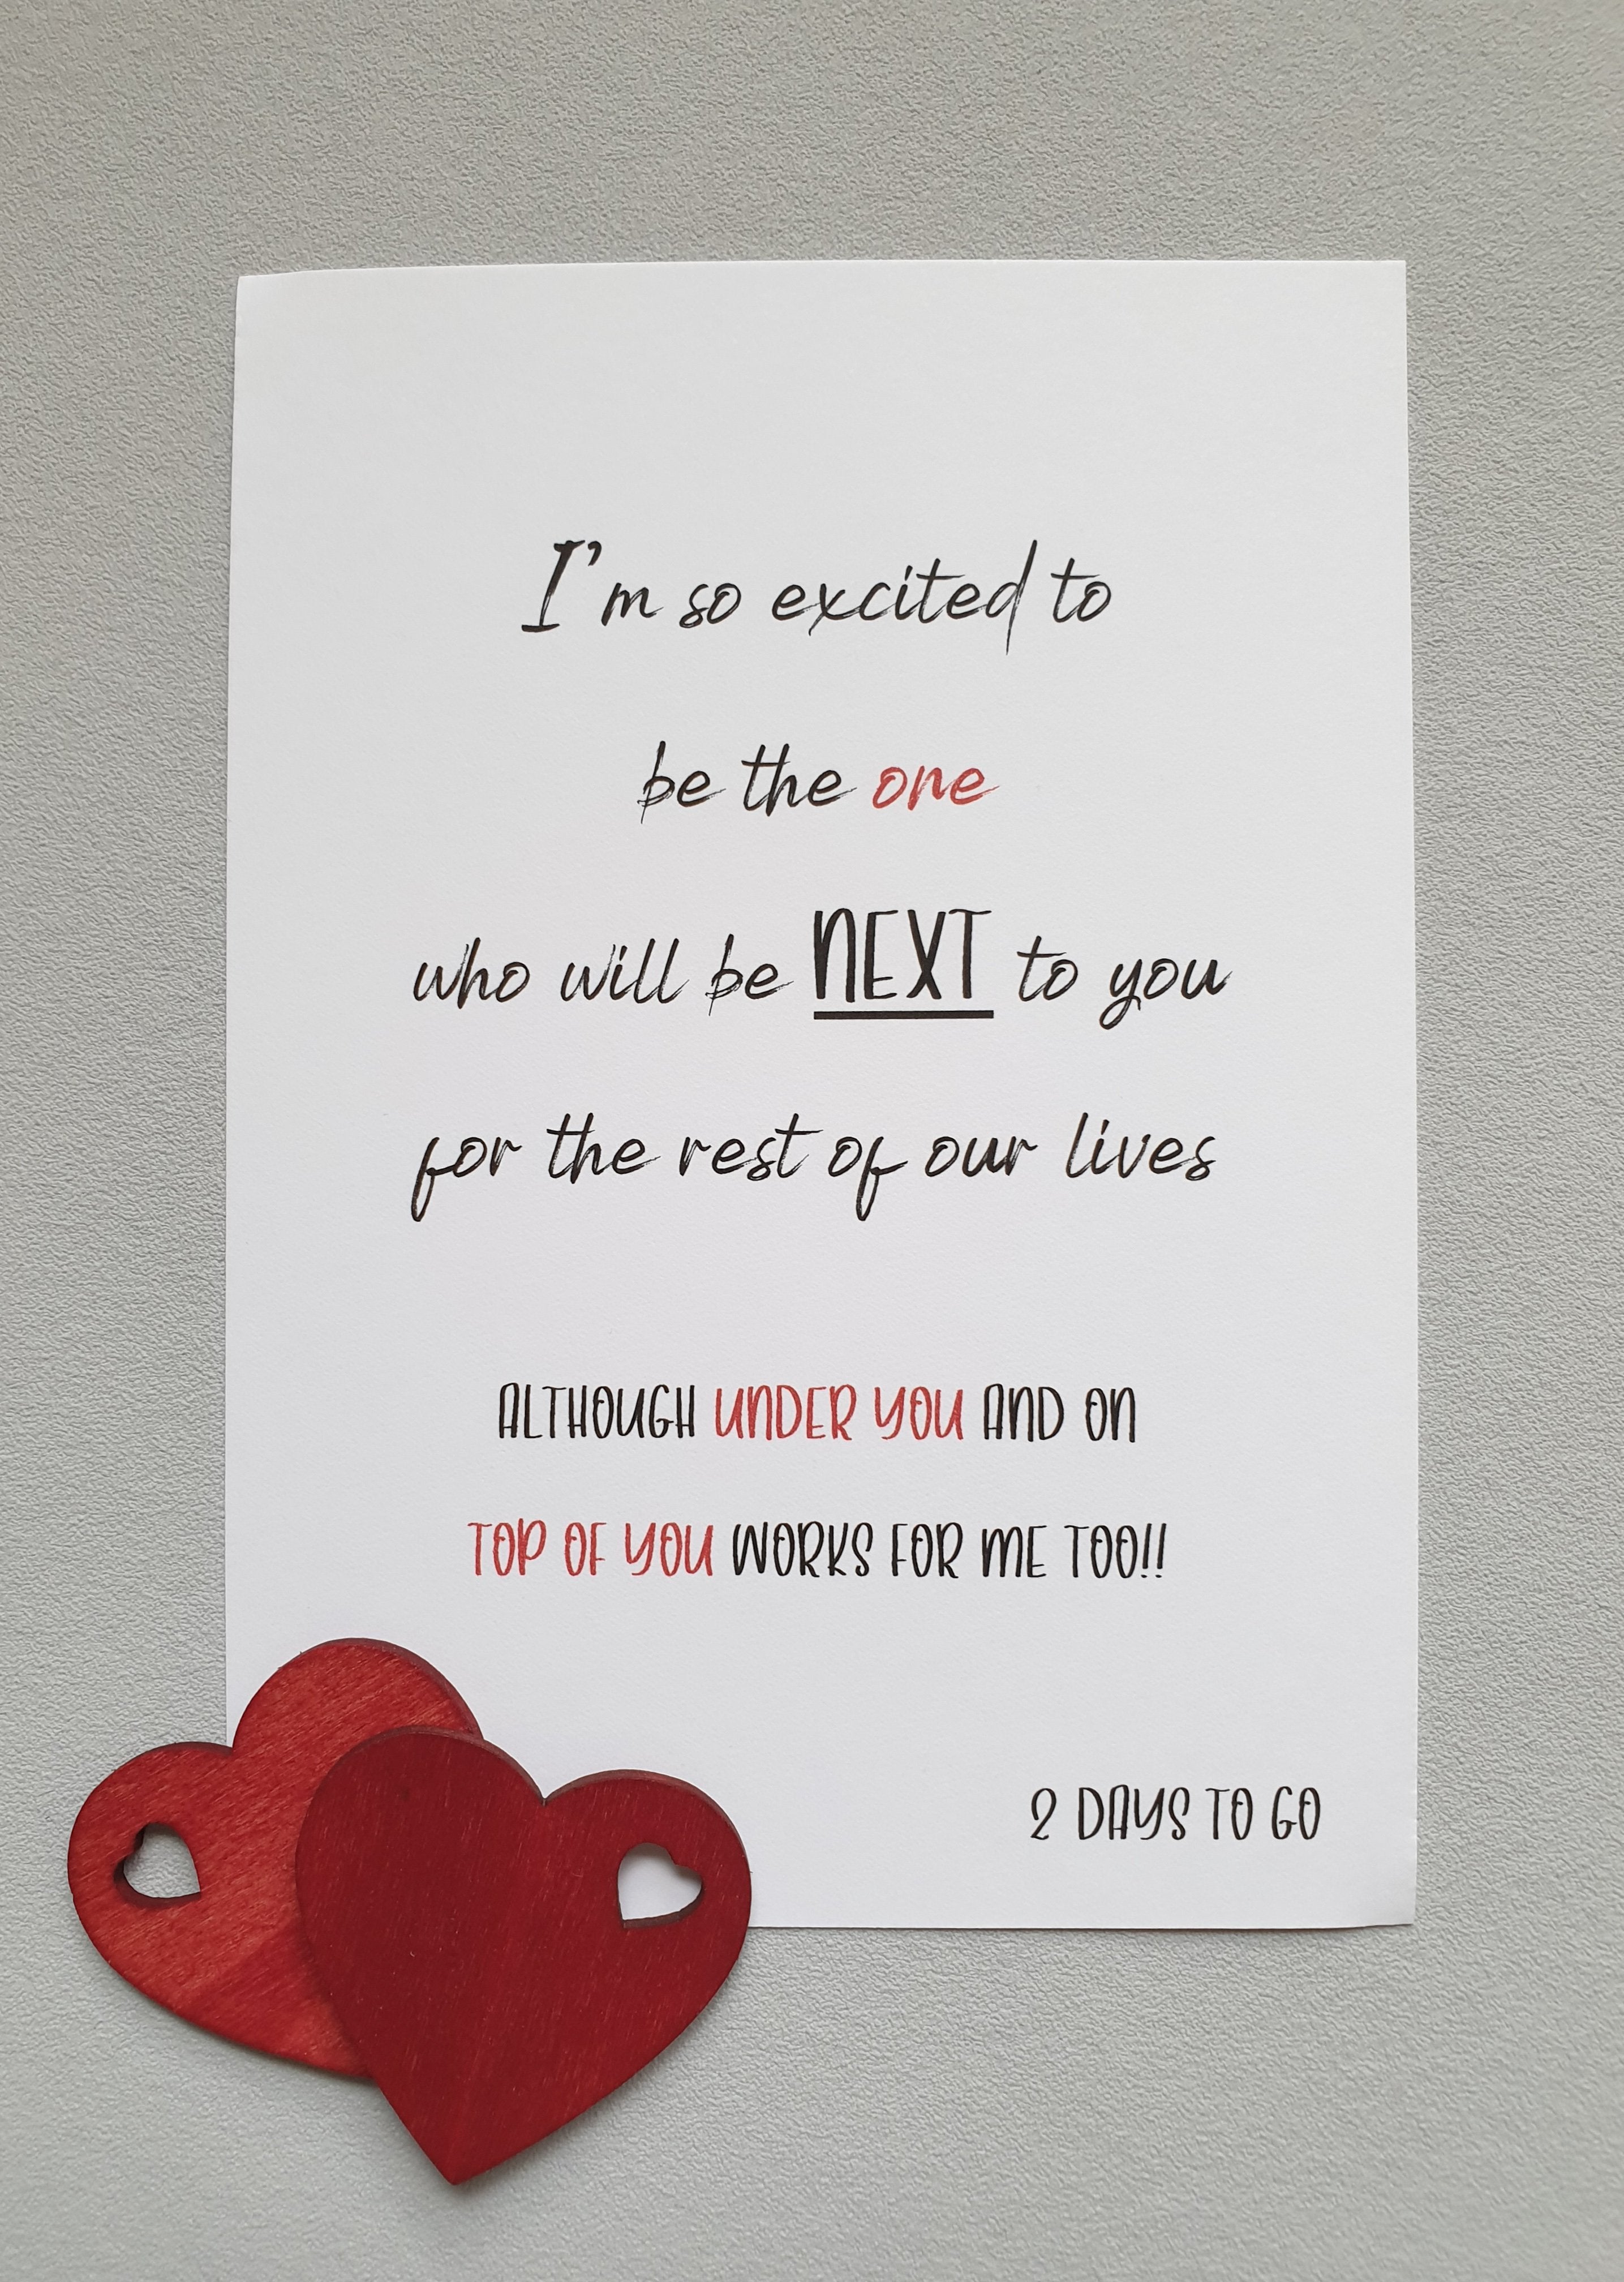 The '2 days to go' A6 Poppleberry wedding countdown postcard on white cardstock with romantic message.